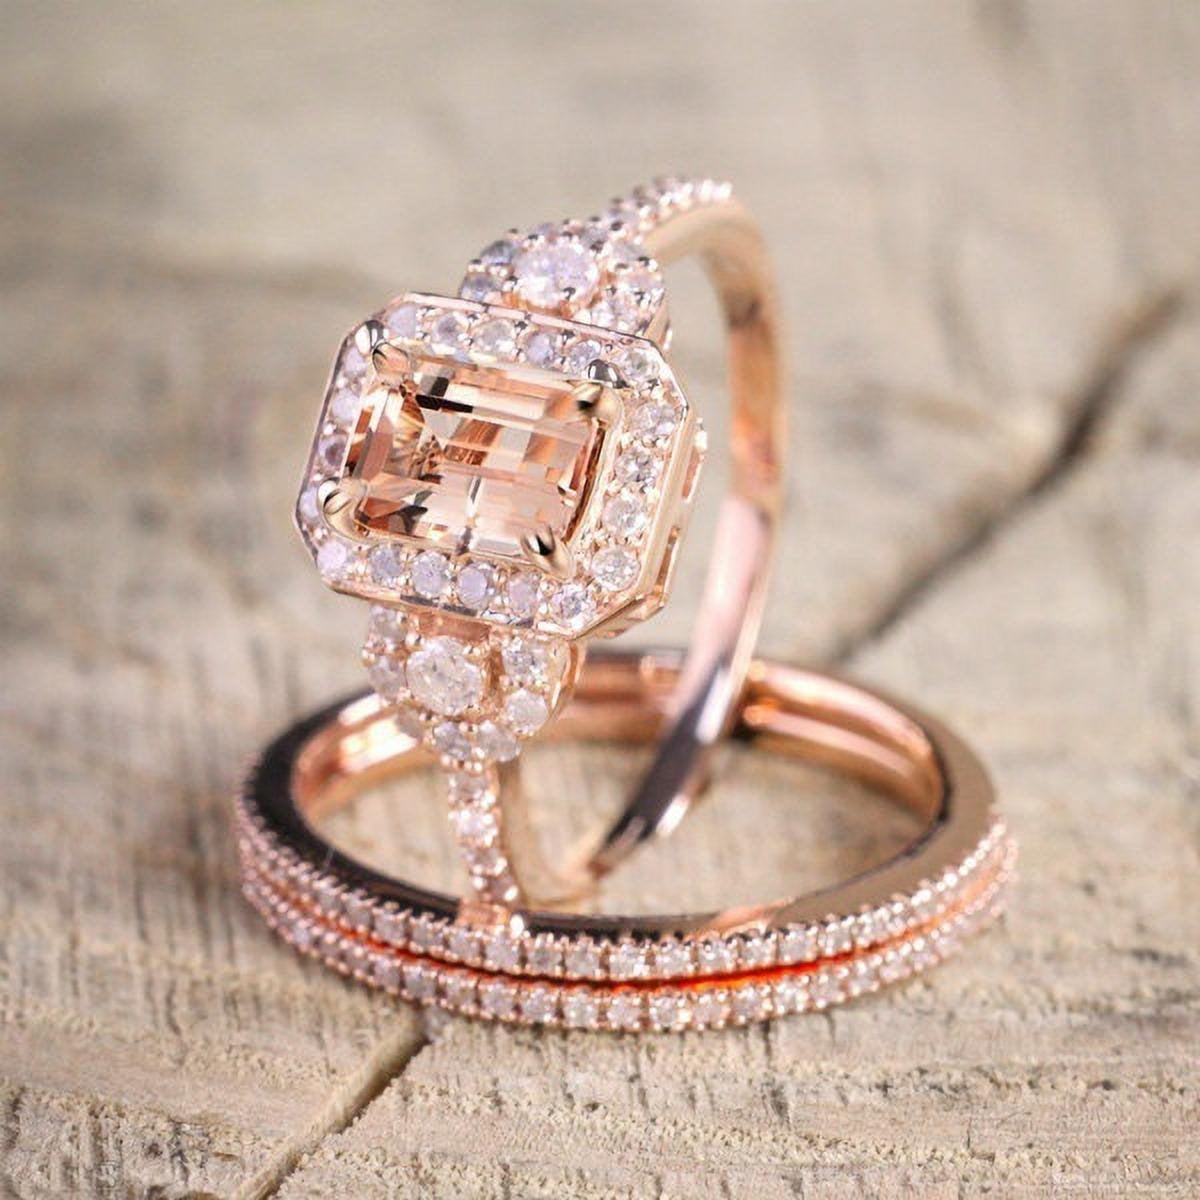 6 Square Diamond Rings We're Obsessing Over | Frank Darling